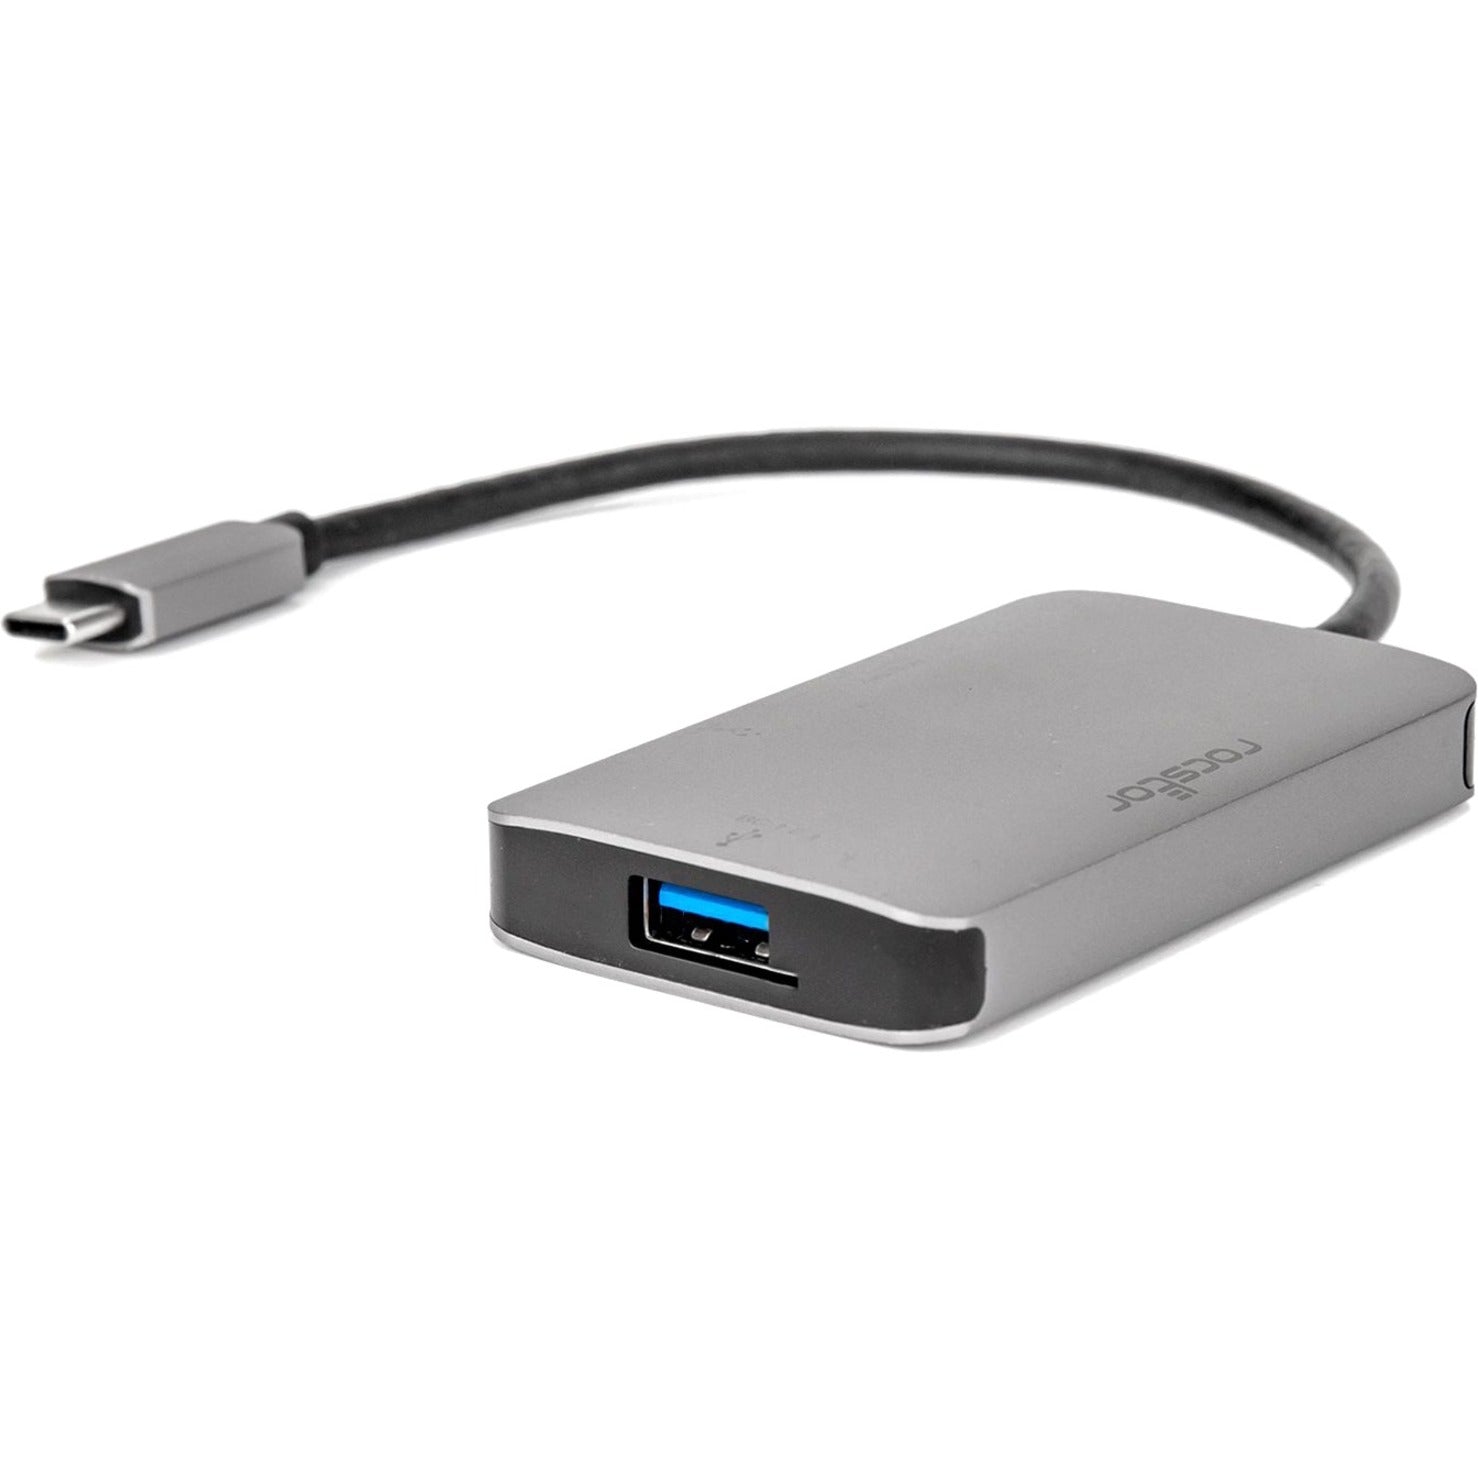 Rocstor Y10A176-S1 USB-C to HDMI Multiport Adapter - USB-C to HDMI/USB-C (3.1)/USB 3.0 Converter Silber